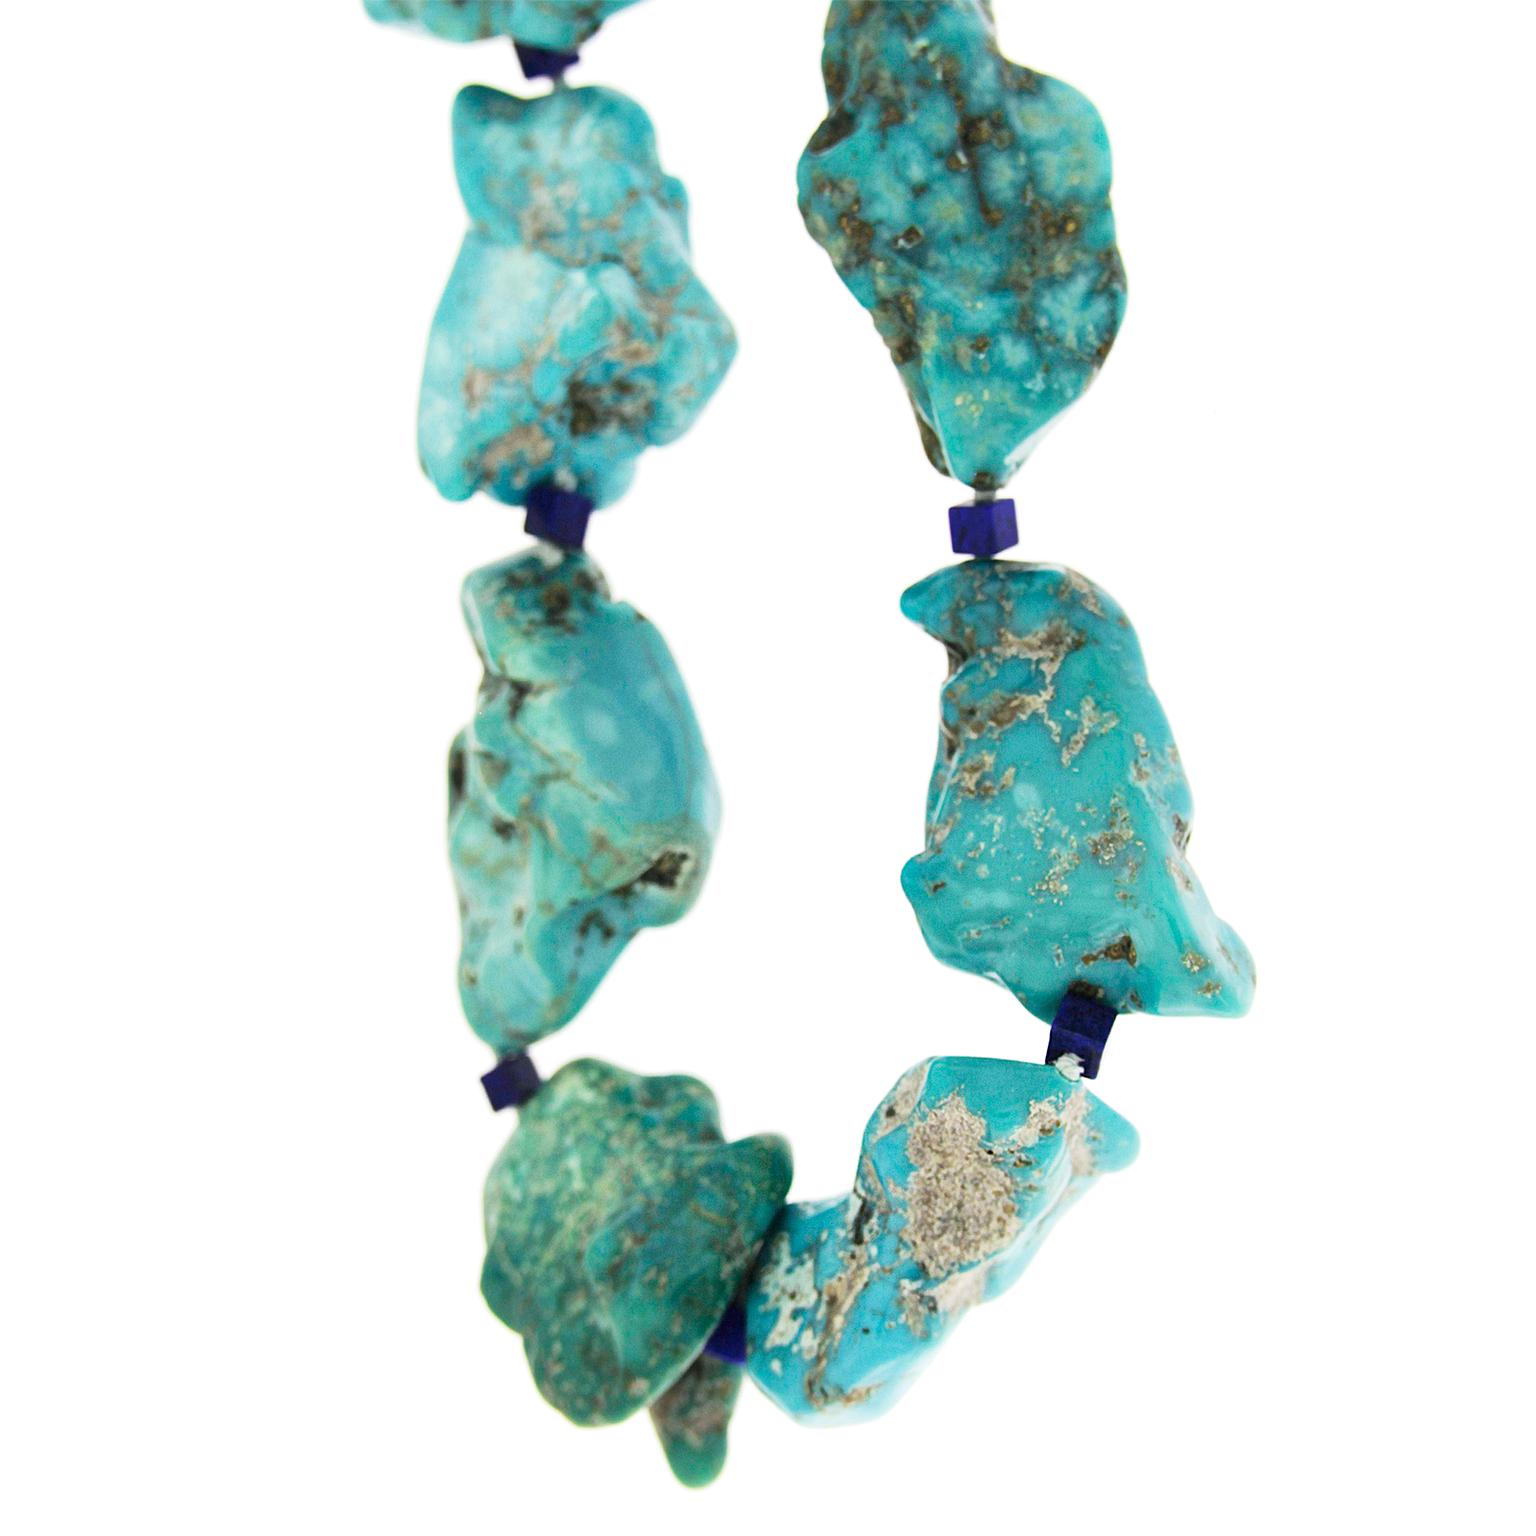 Modern Valentin Magro Large Turquoise Nuggets and Lapis Lazuli Cubes Statement Necklace